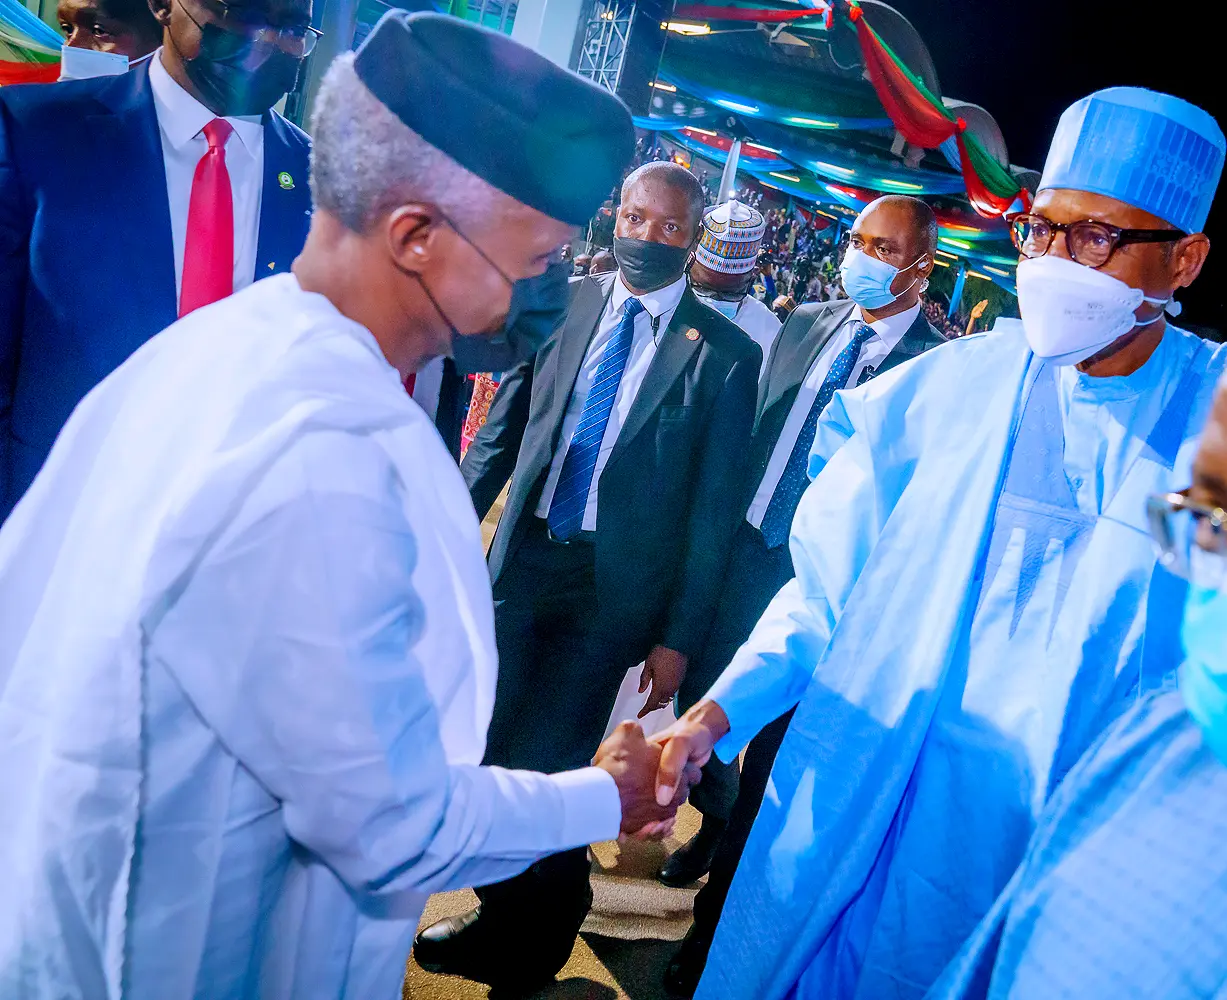 APC Presidential Primary: Osinbajo Leaves Convention Venue As Vote Counting Continues